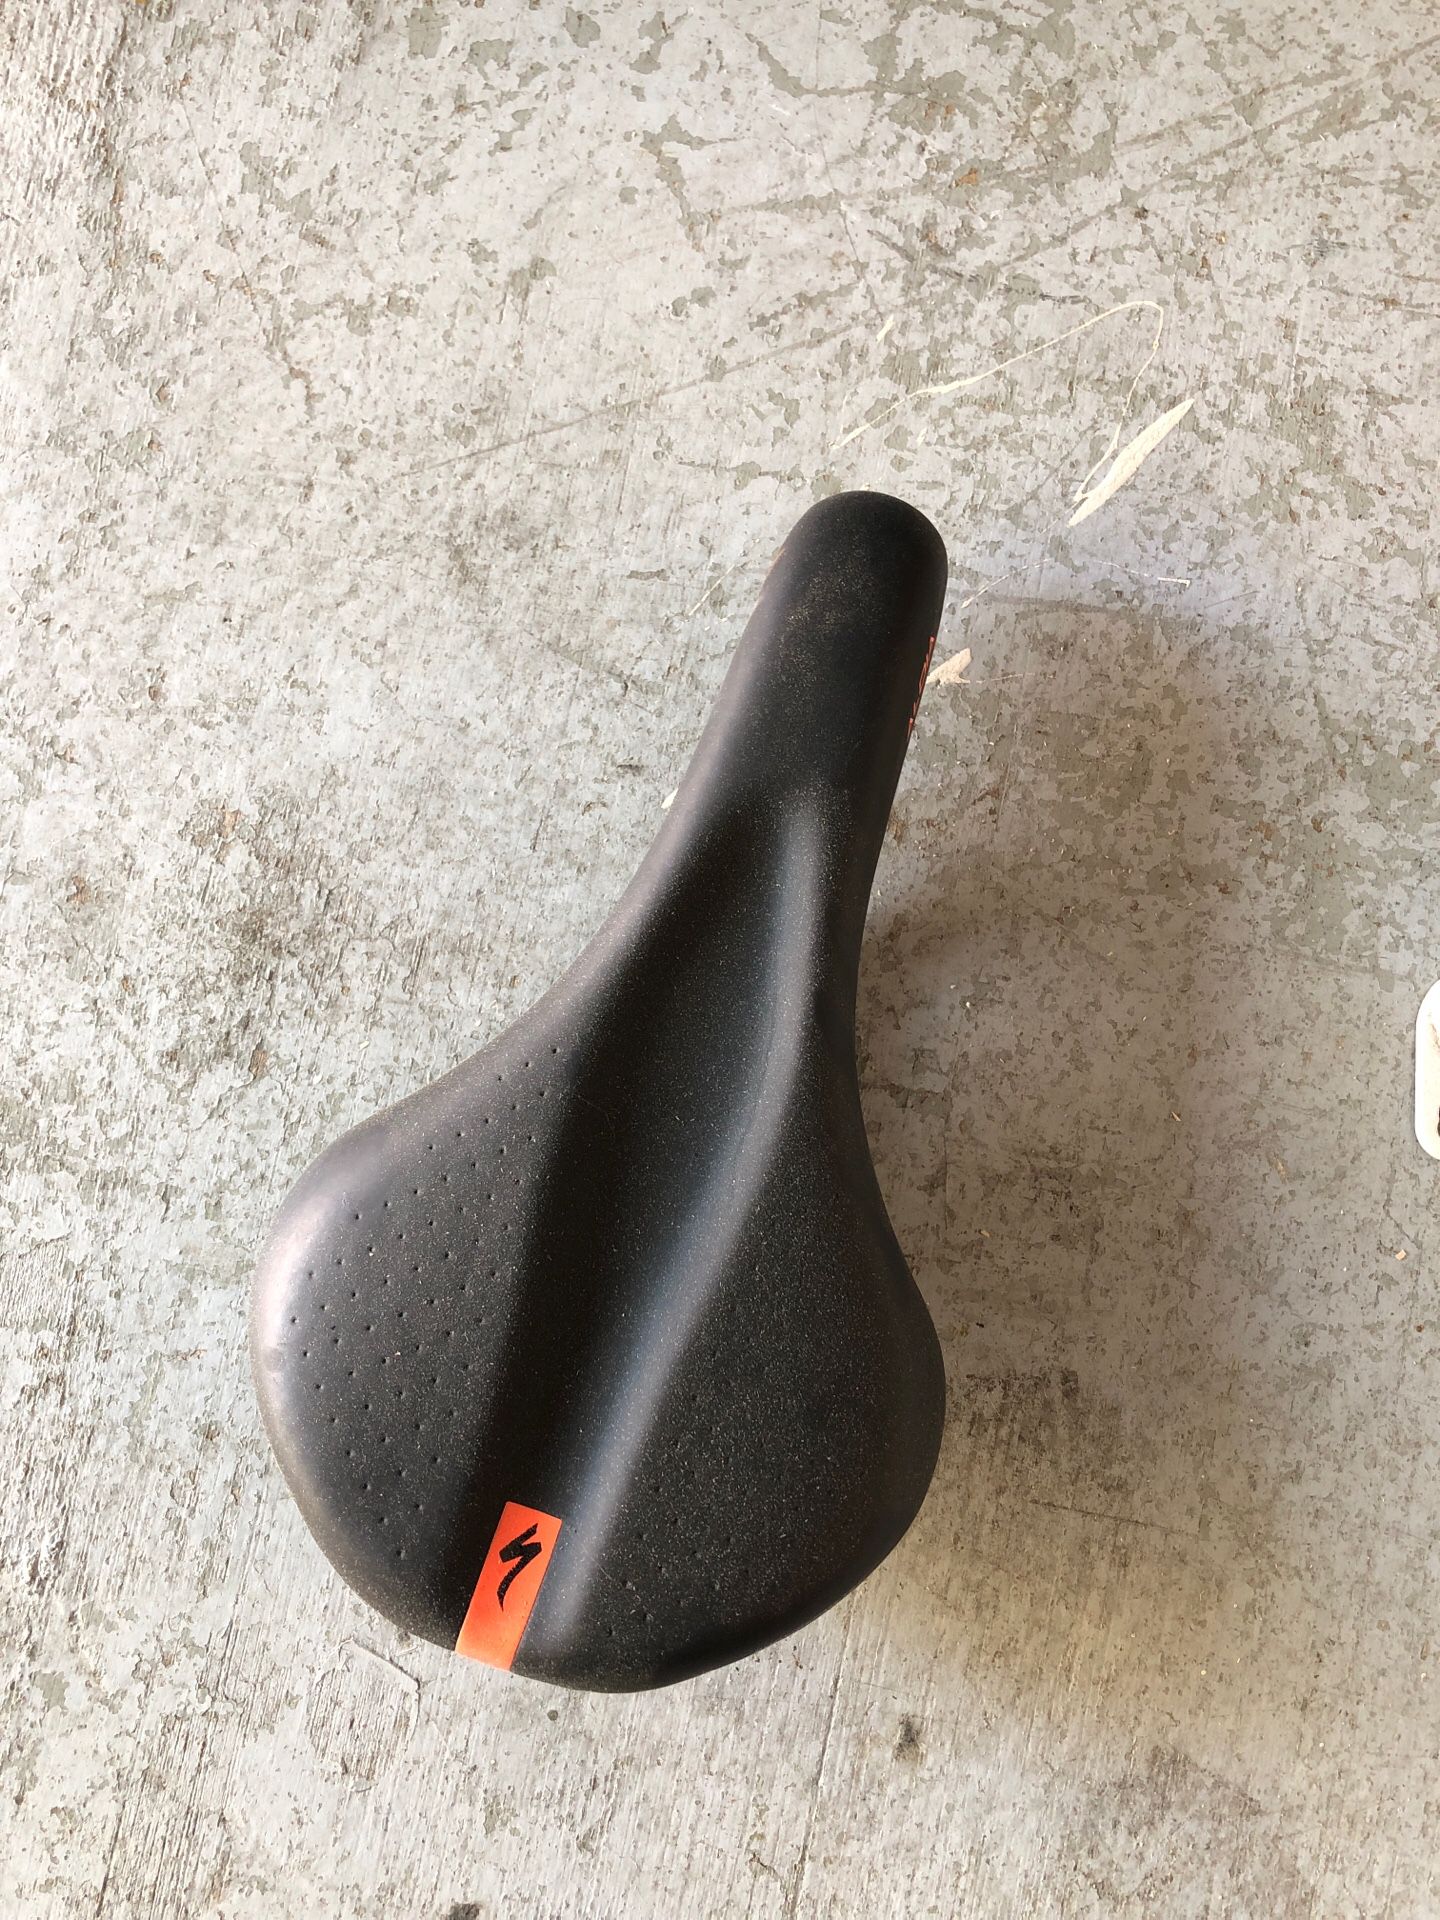 Specialized seat great condition